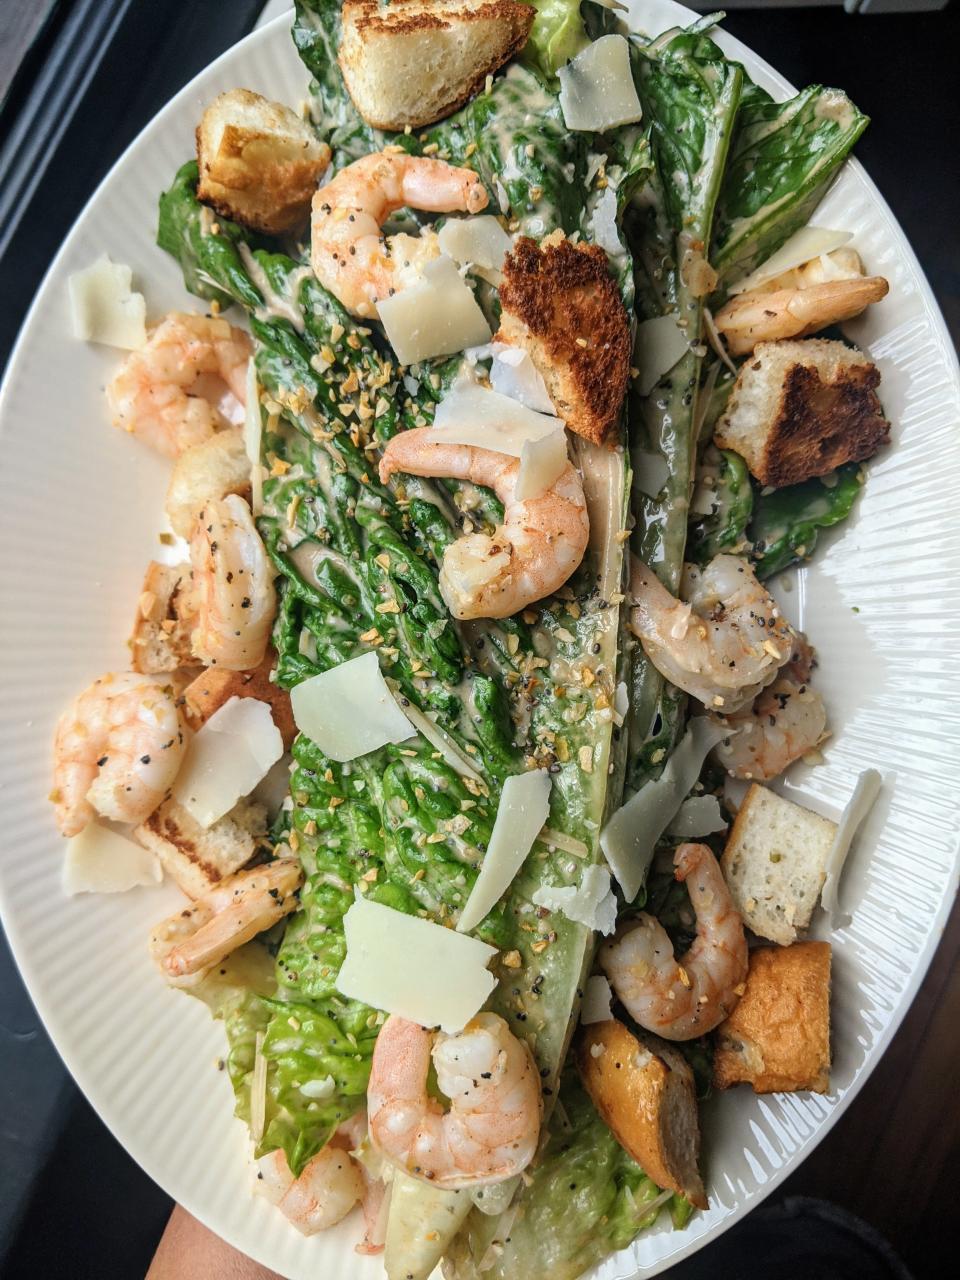 Bar Vetti now offers provisions like its cult-favorite housemade date and anchovy Caesar dressing and Everything Crunch. Paired with Romaine from Logan Street Market, it made a Bar Vetti at-home experience for Courier Journal food columnist Dana McMahan.